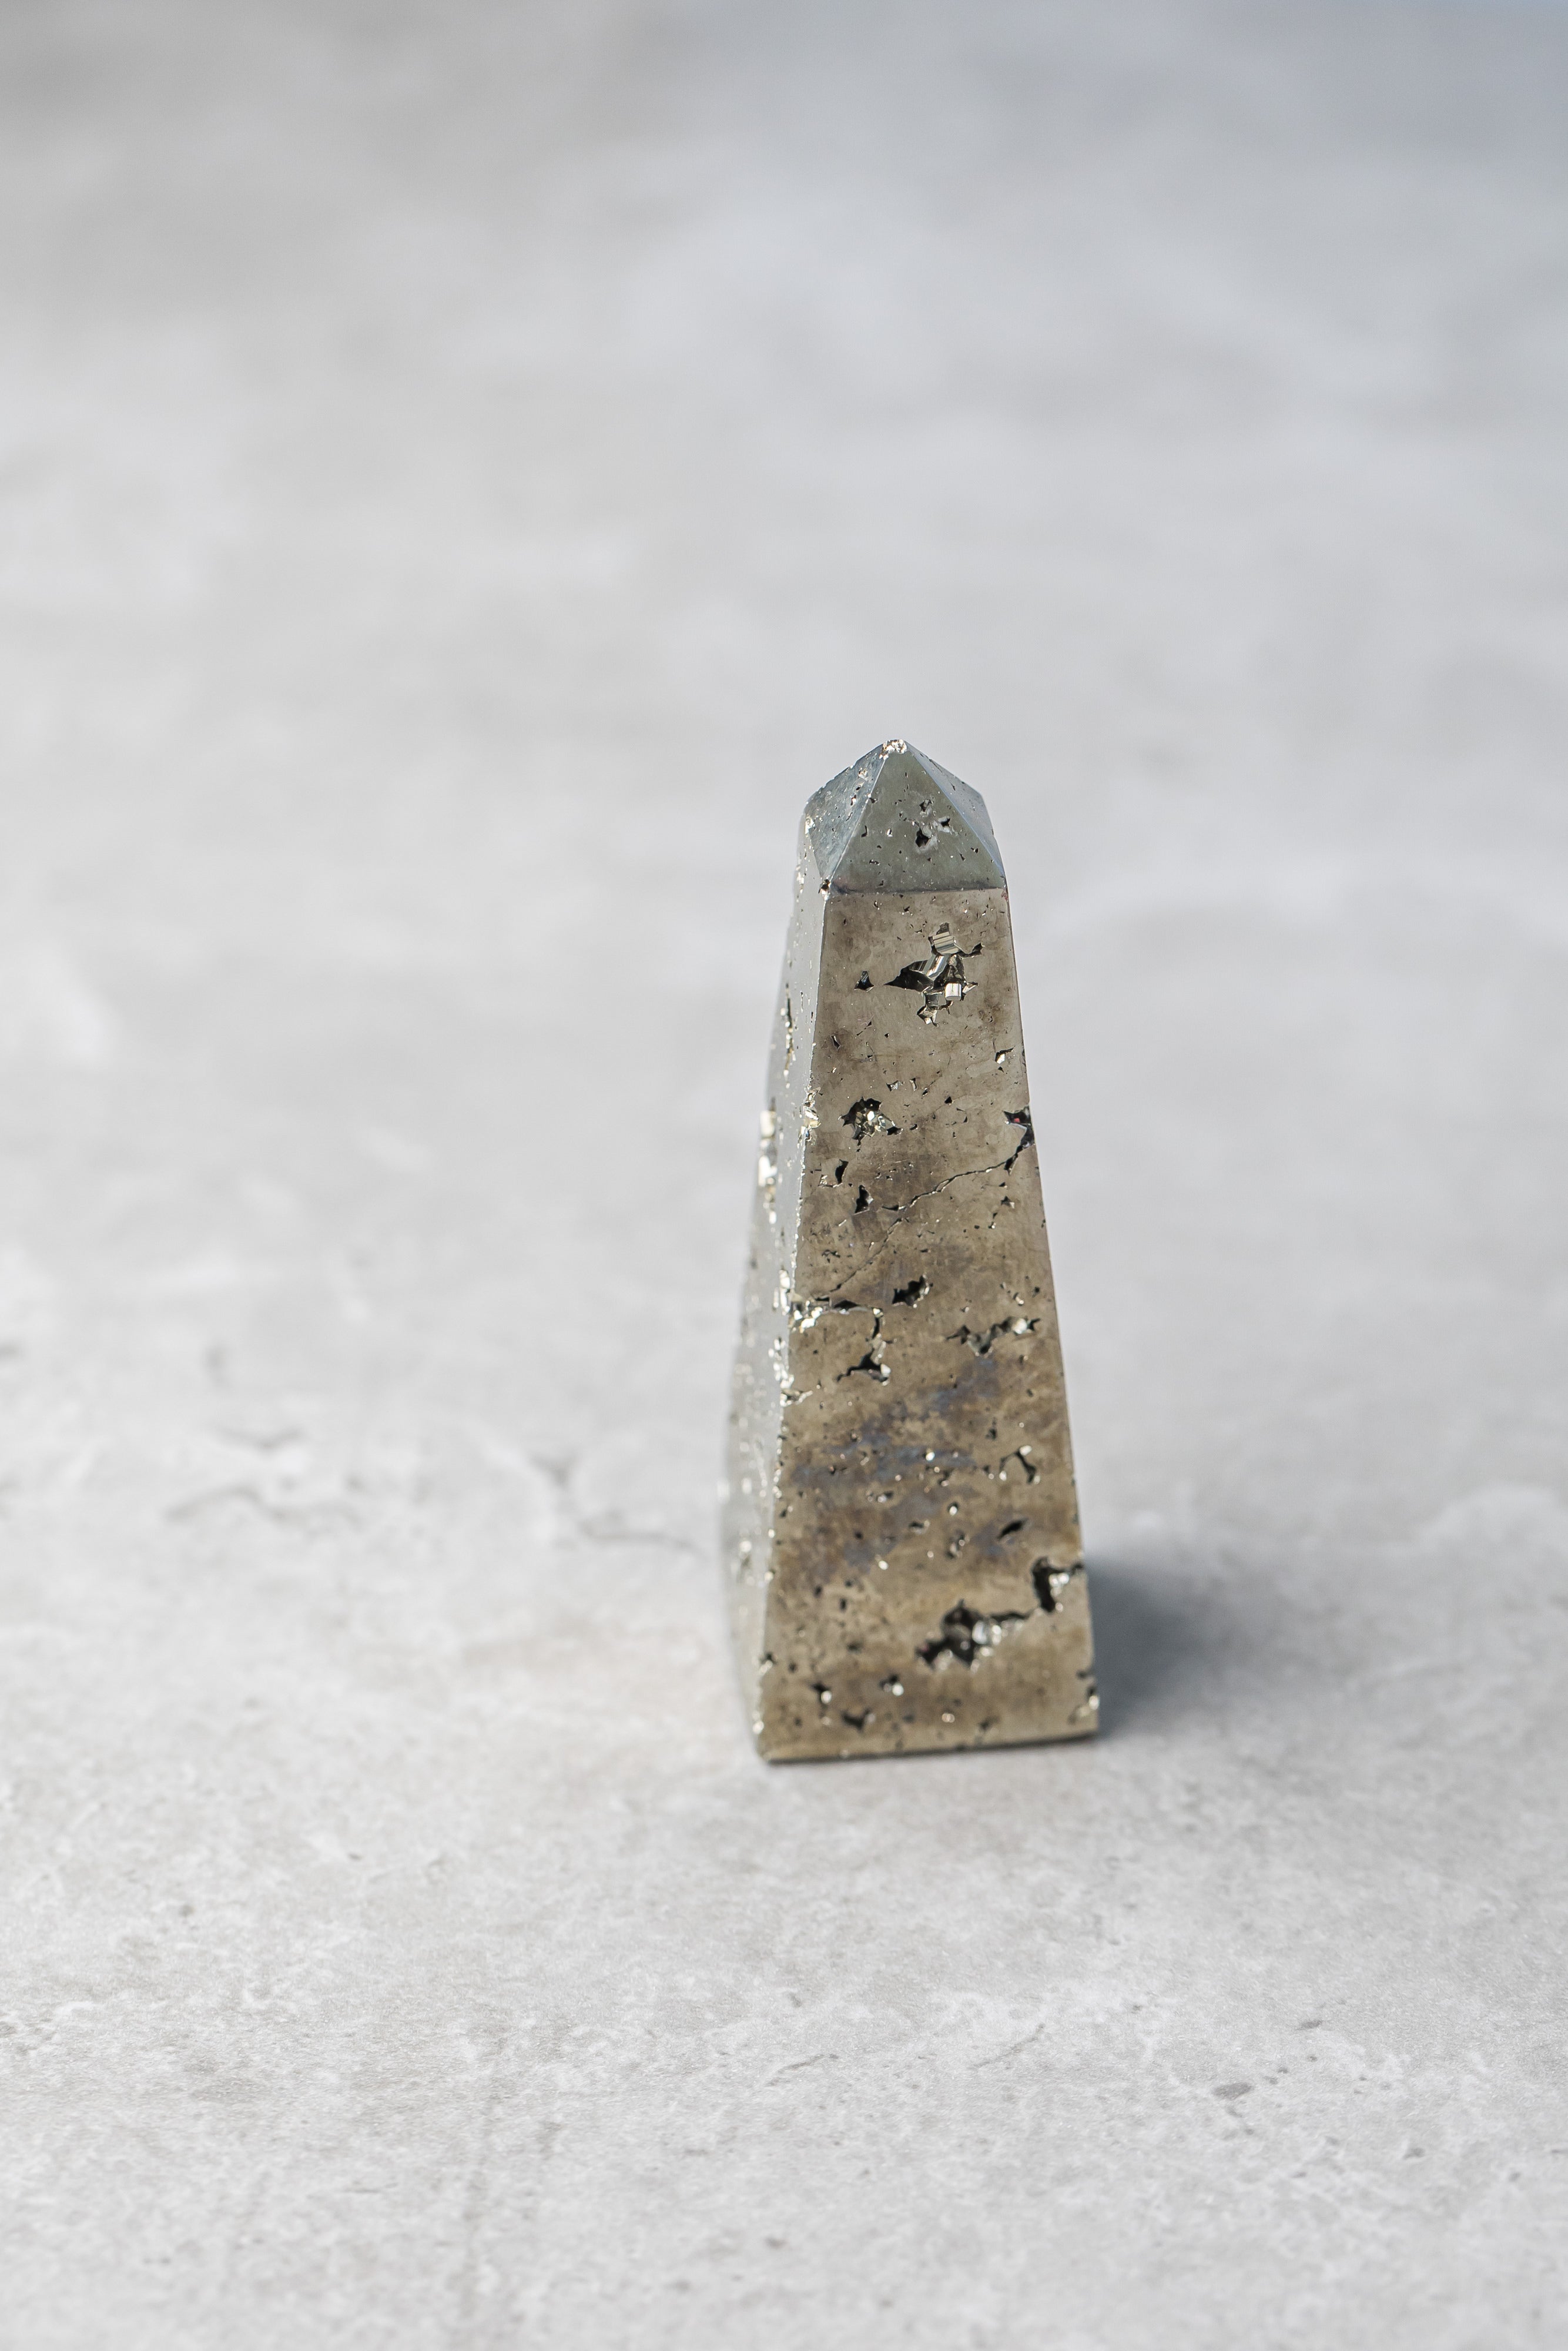 Small Pyrite Point - Prosperity-Attracting Crystal for Confidence, Protection & Solar Plexus Chakra Activation - Everyday Rocks